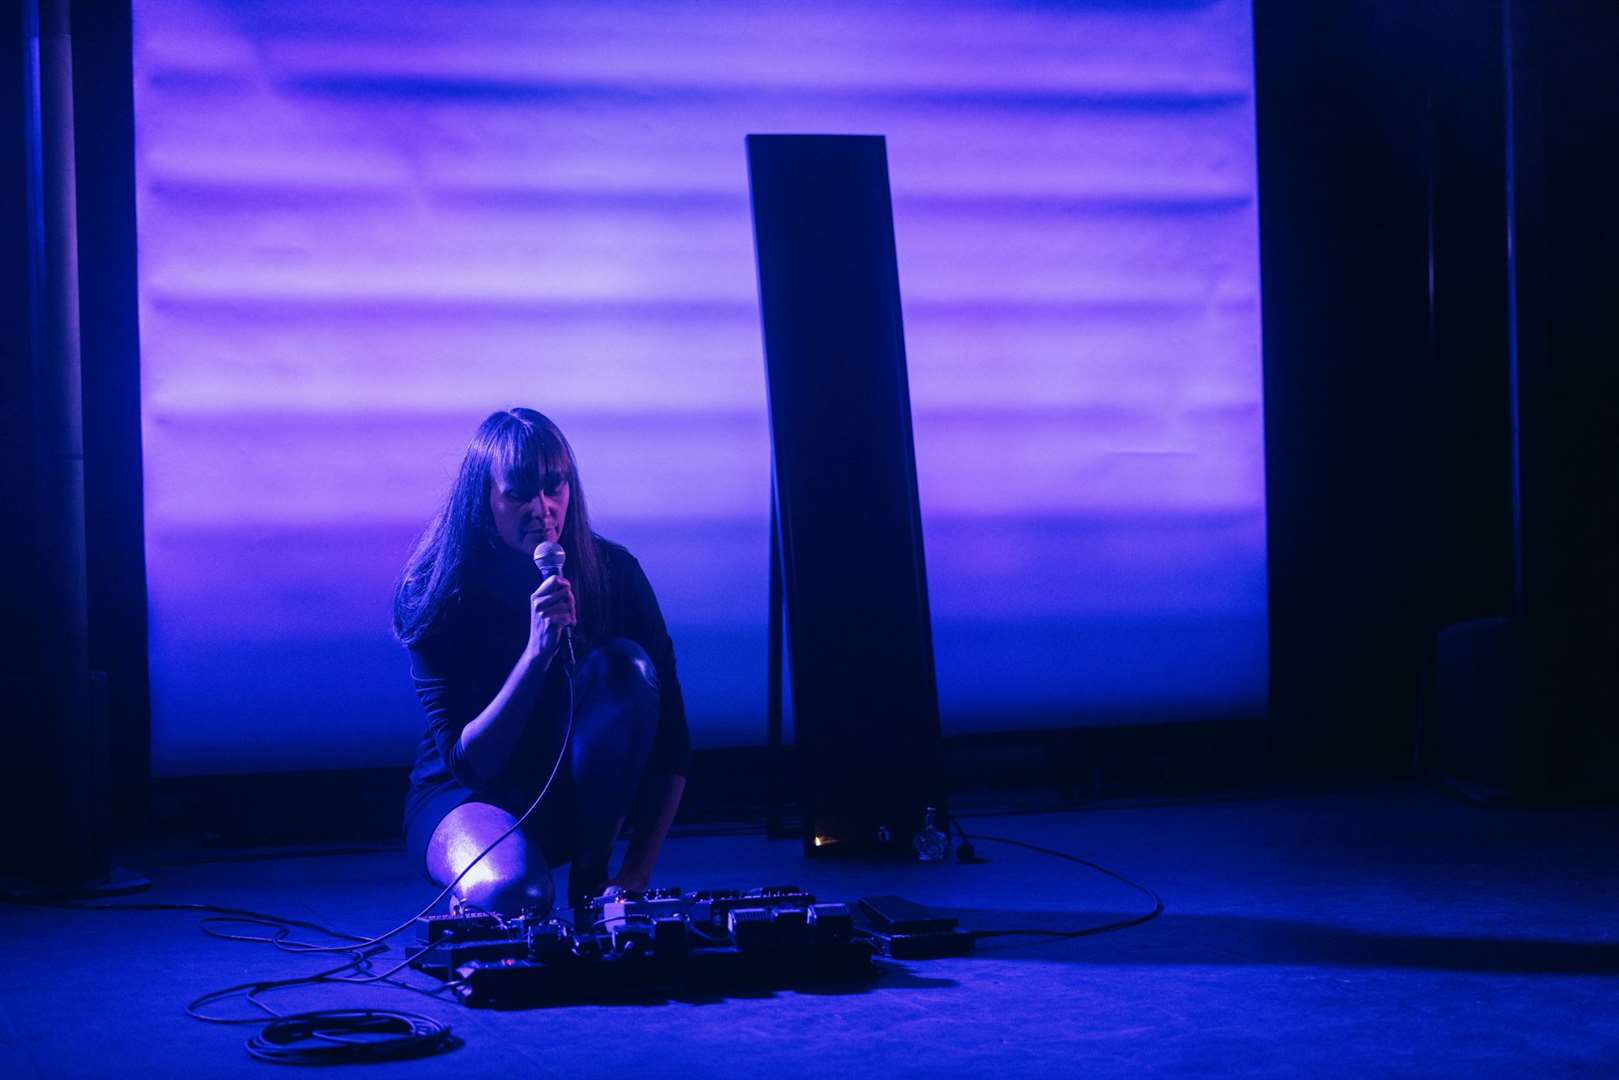 Unbecoming is created and performed by Anna Porubcansky. Picture: Louise Mather